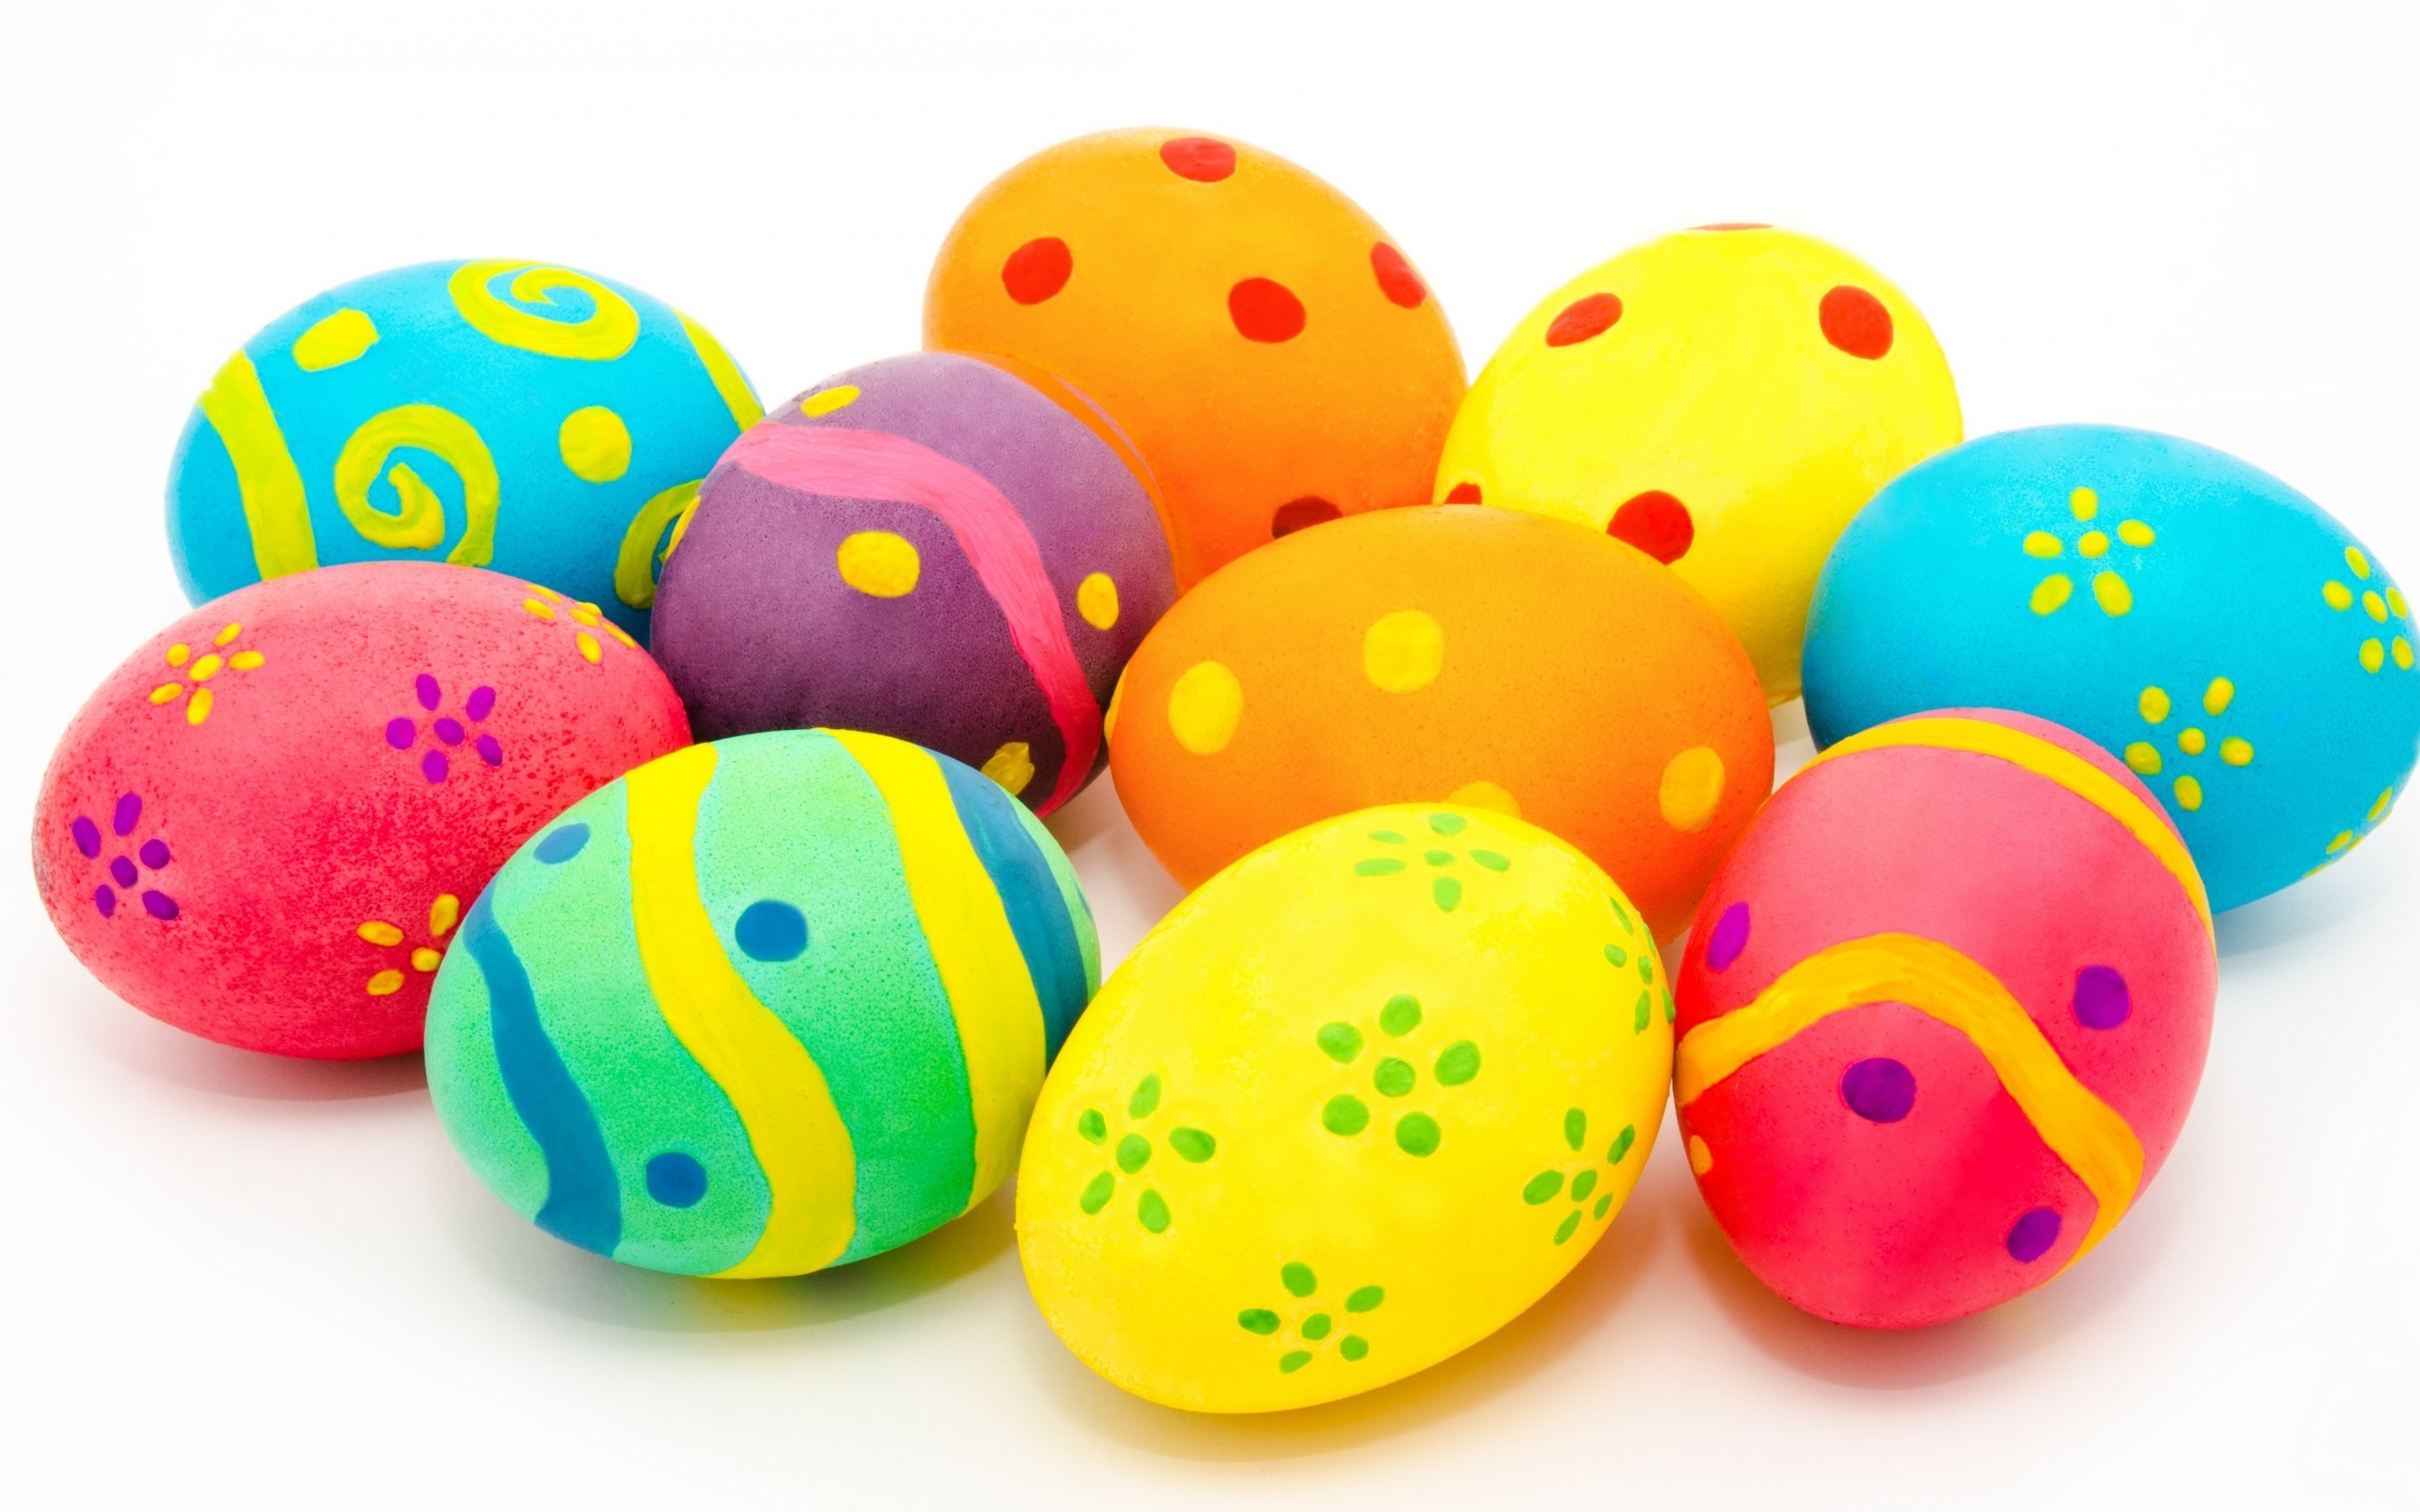 Many Colorful Easter Eggs for 2880 x 1800 Retina Display resolution